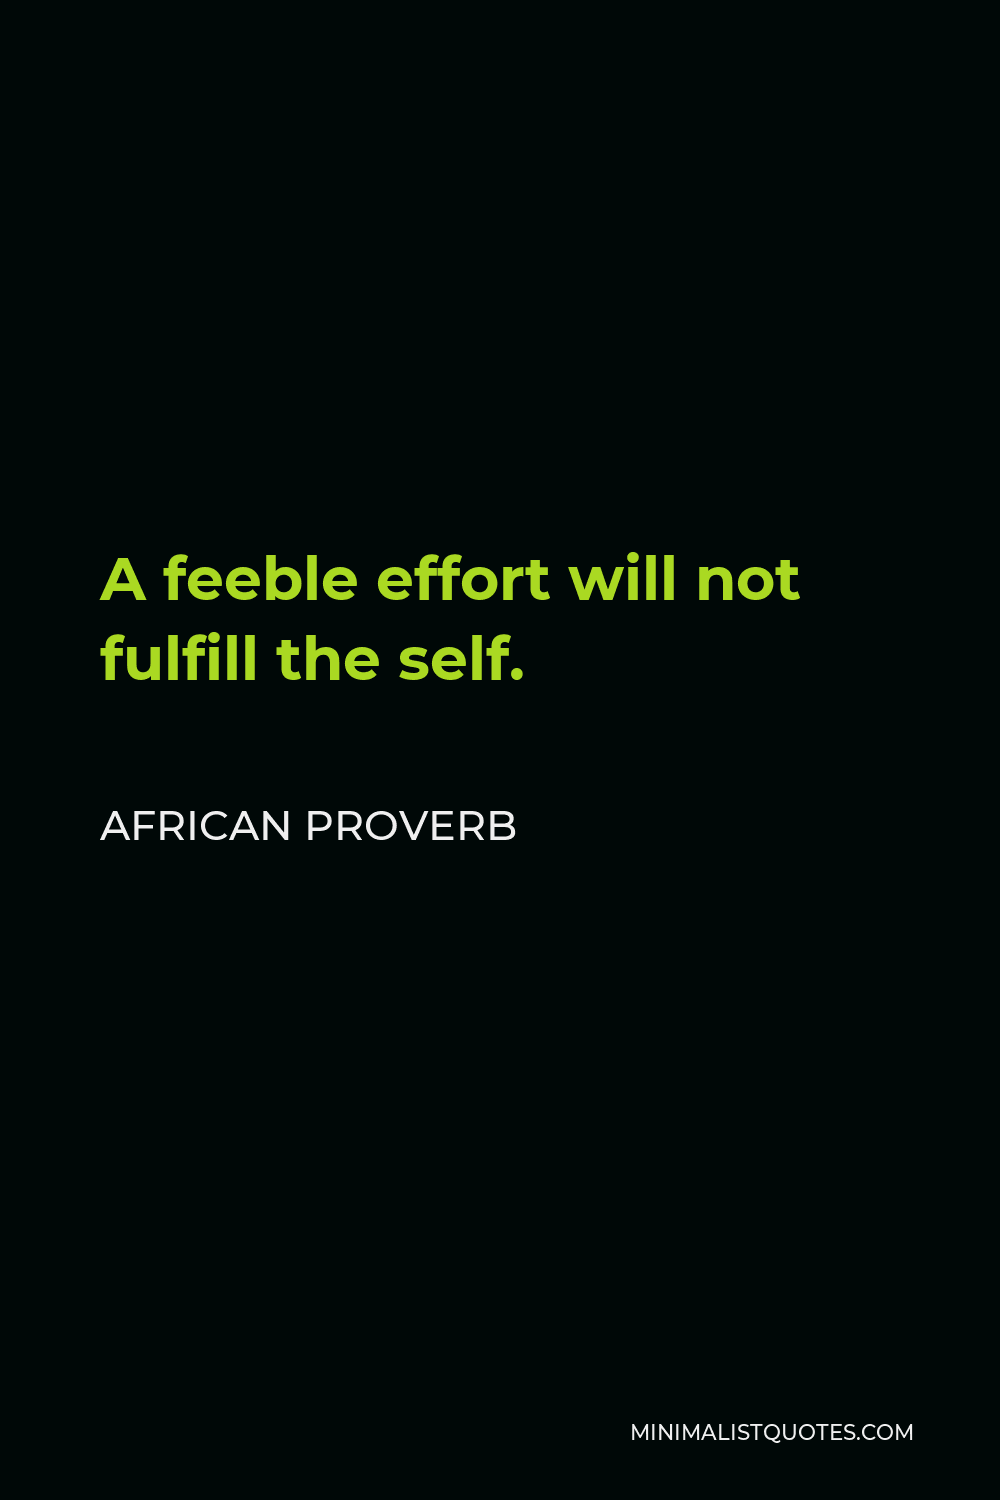 African Proverb Quote - A feeble effort will not fulfill the self.